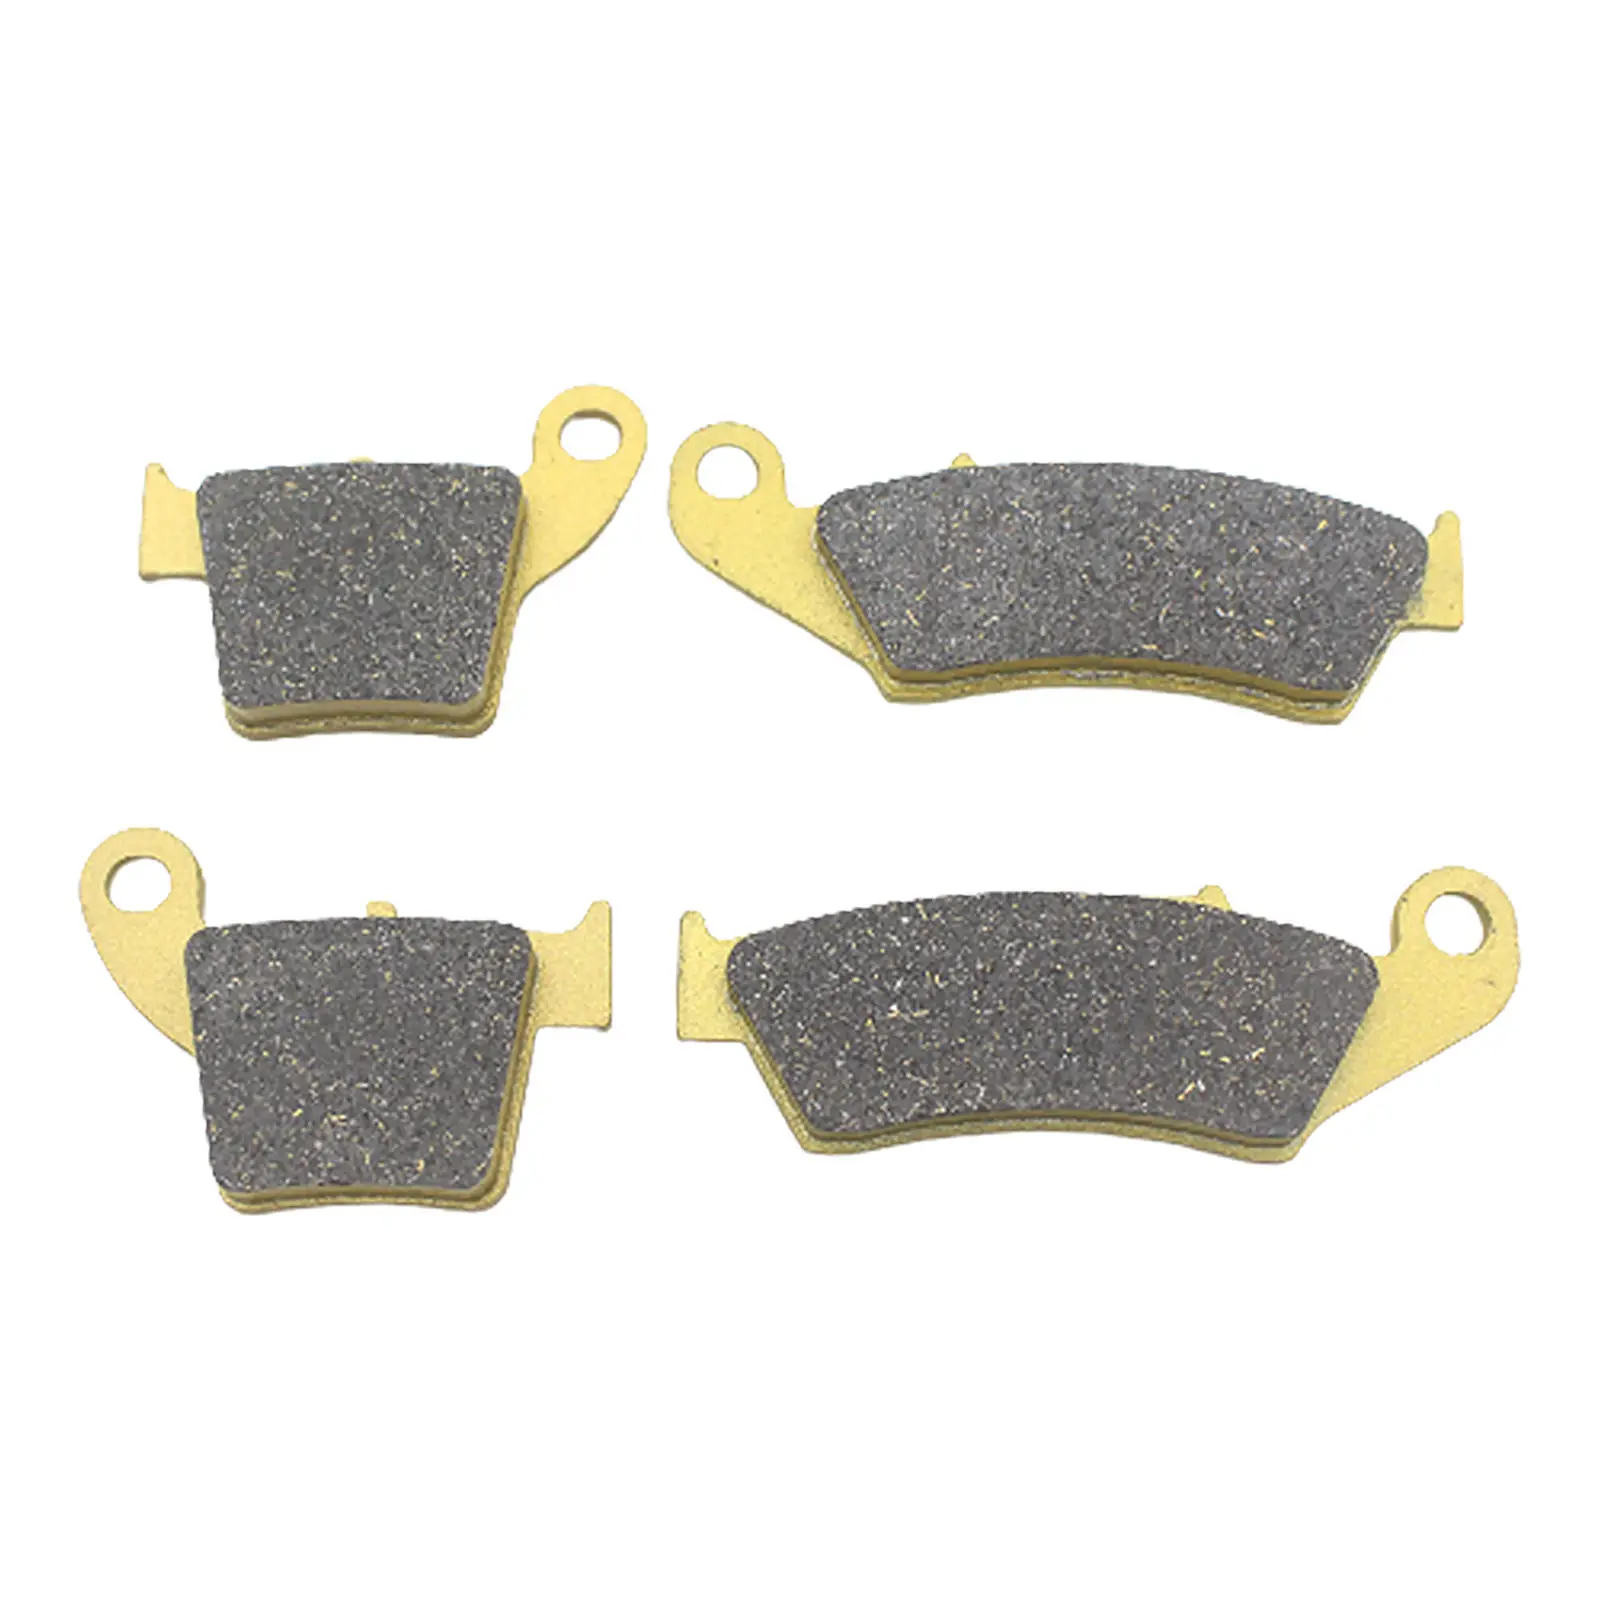 4Pcs Motorcycle Front Rear Brake Pads Replacement Set For CR125 CR250 XR300R XR400 XR650L XR600